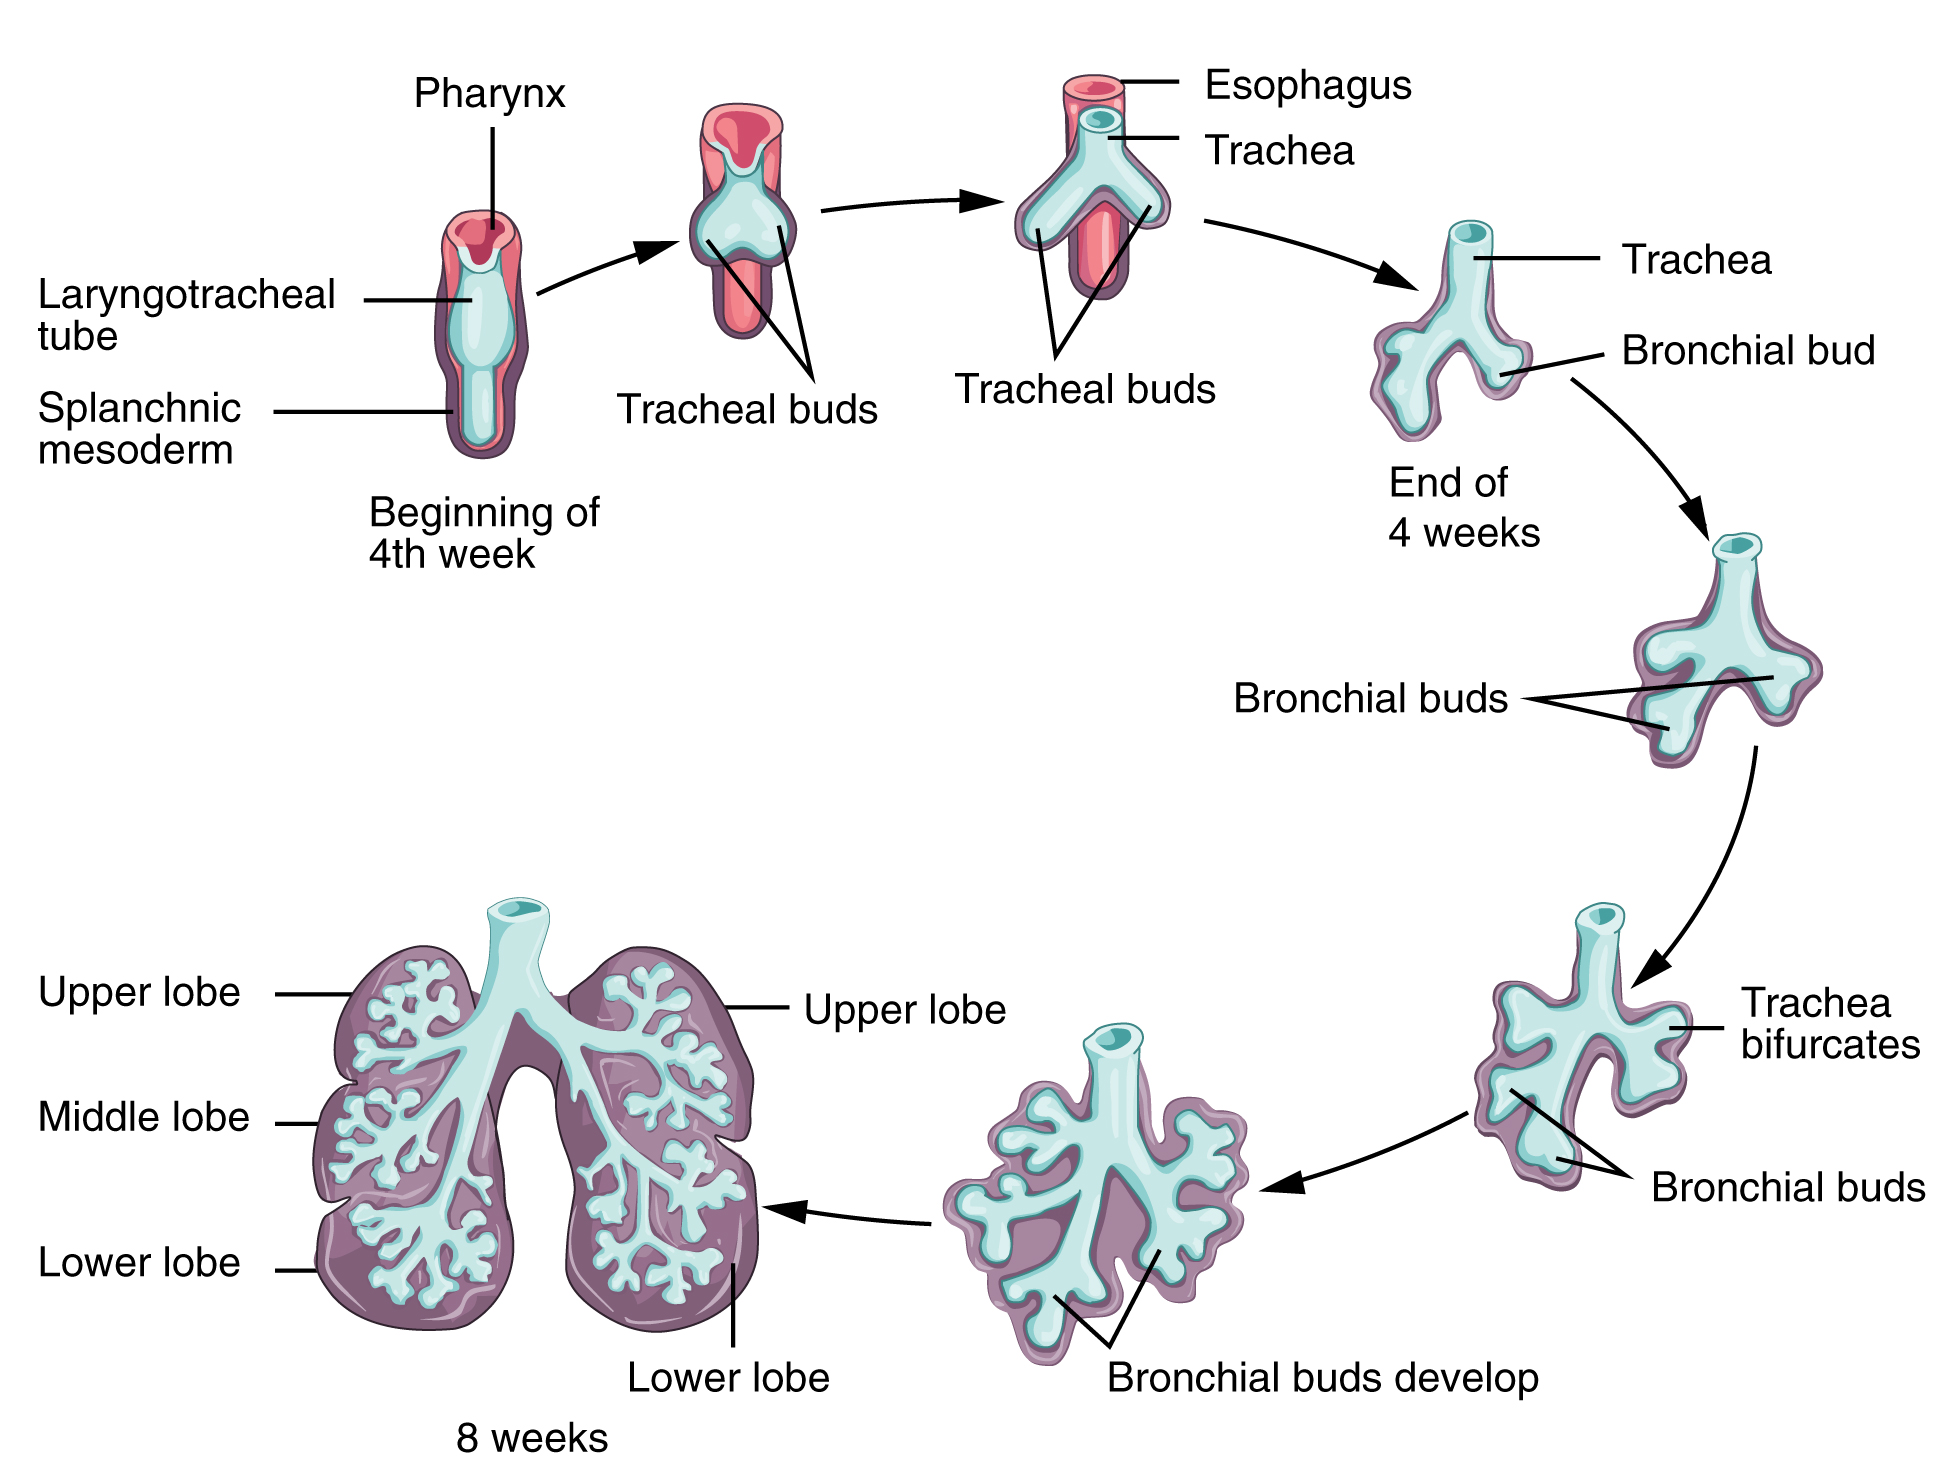 This flowchart shows the embryonic development of the respiratory system and correlates the gestational age to the appearance of new features.